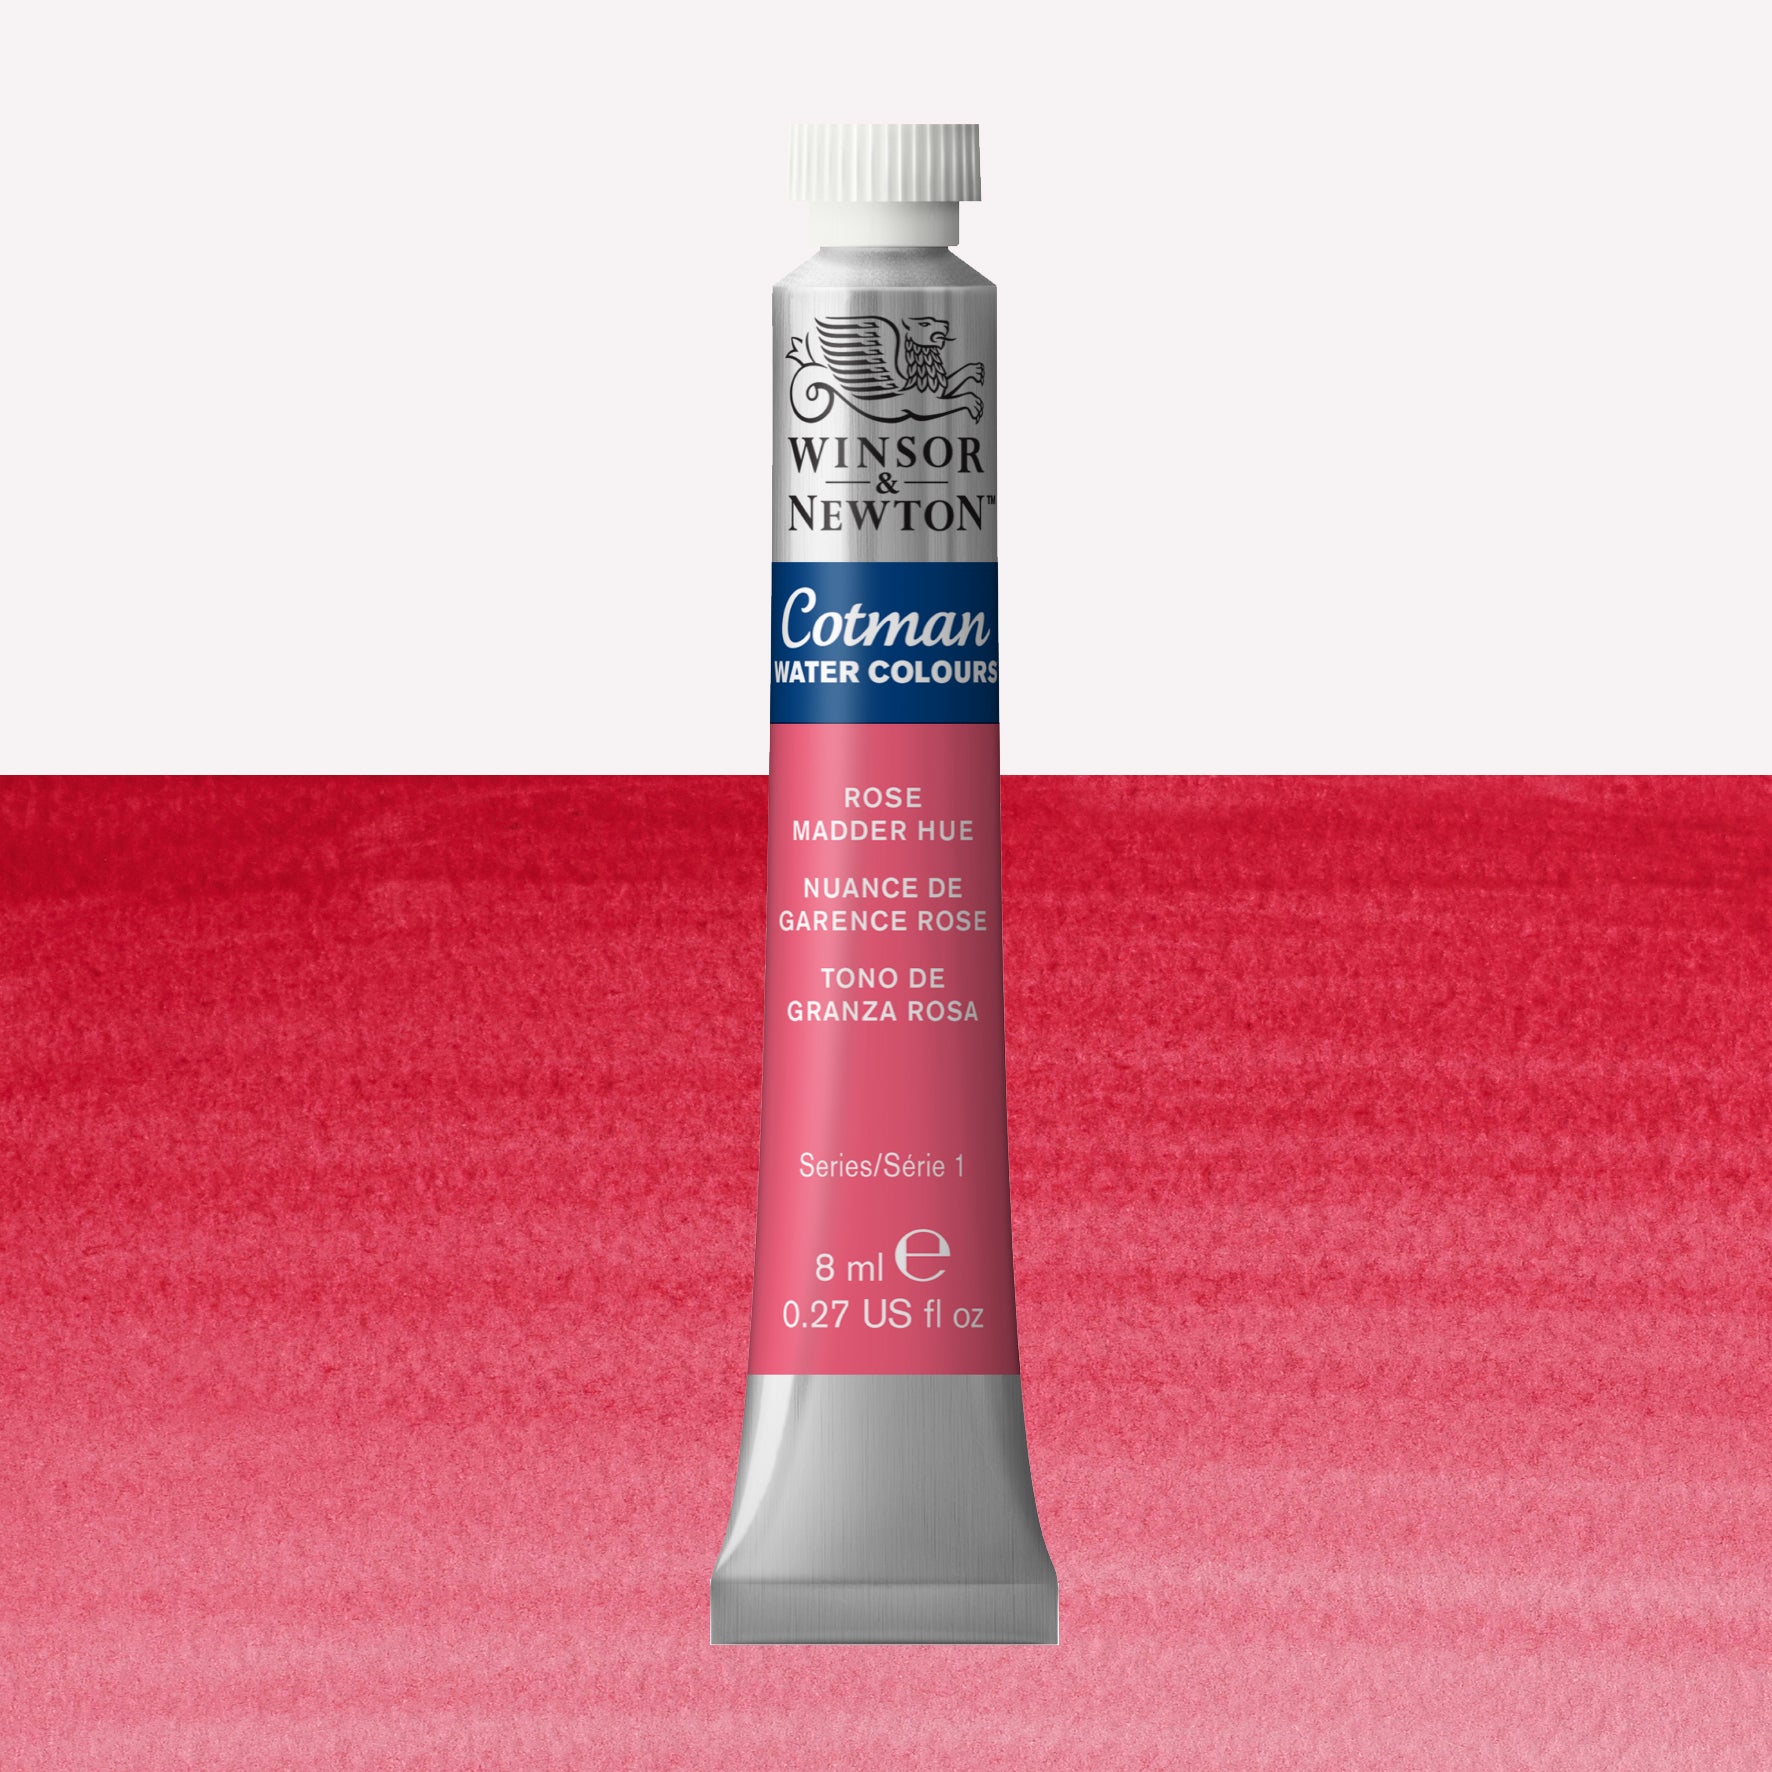 Winsor & Newton Cotman watercolour paint packaged in 8ml silver tubes with a white lid in the shade Rose Madder Hue over a highly pigmented colour swatch.